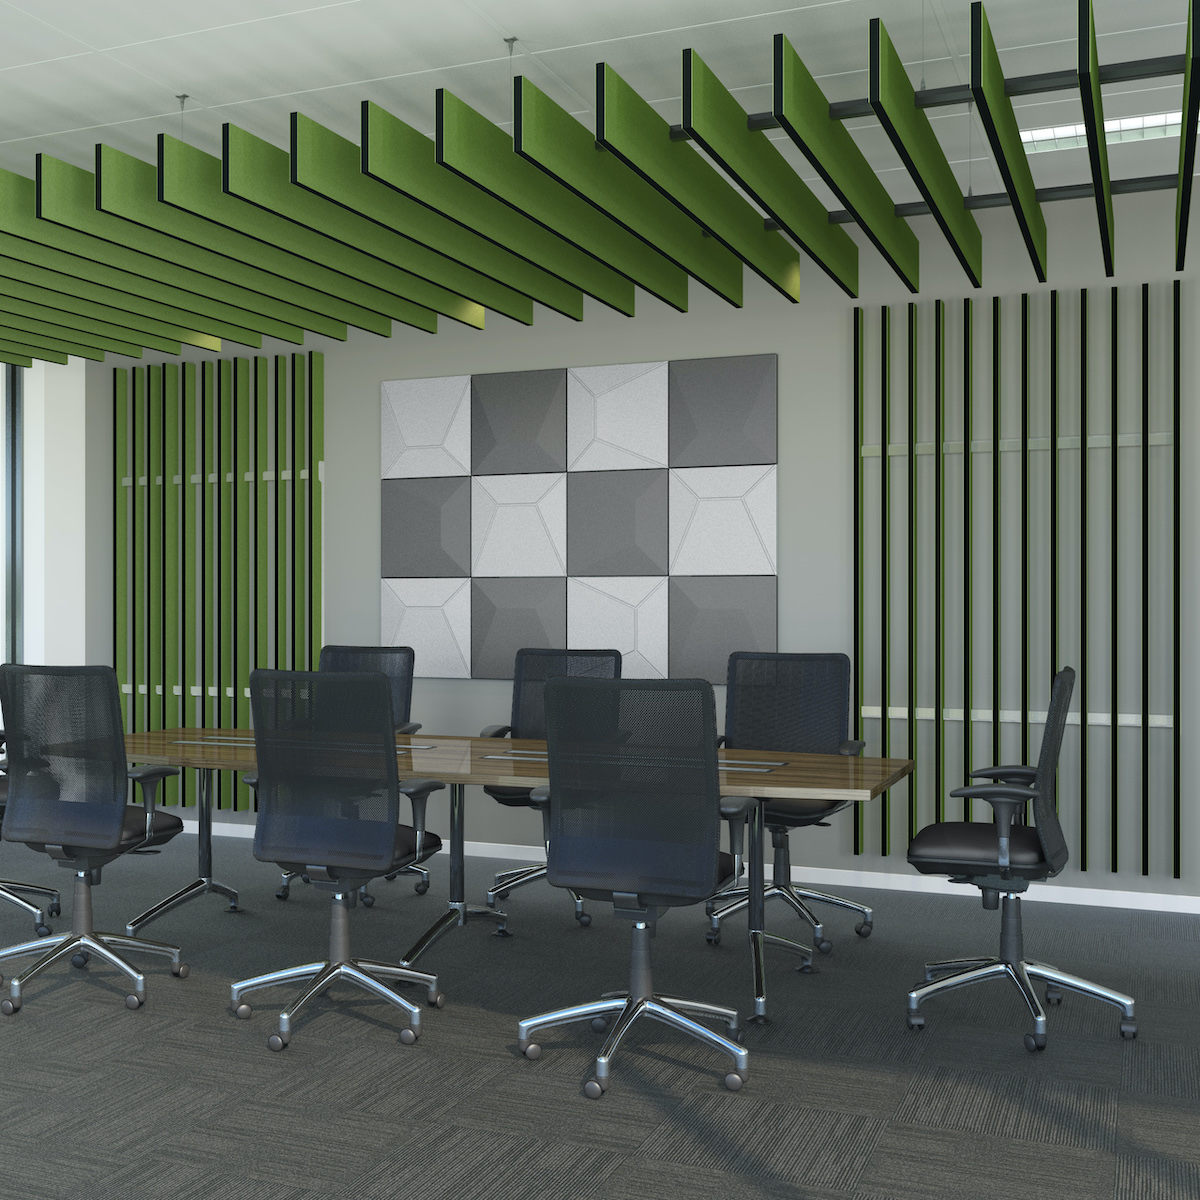 Image of office with various acoustic tiles and blades attached to the wall and ceiling. Acoustic blades from Acoustek's Opus Collection.